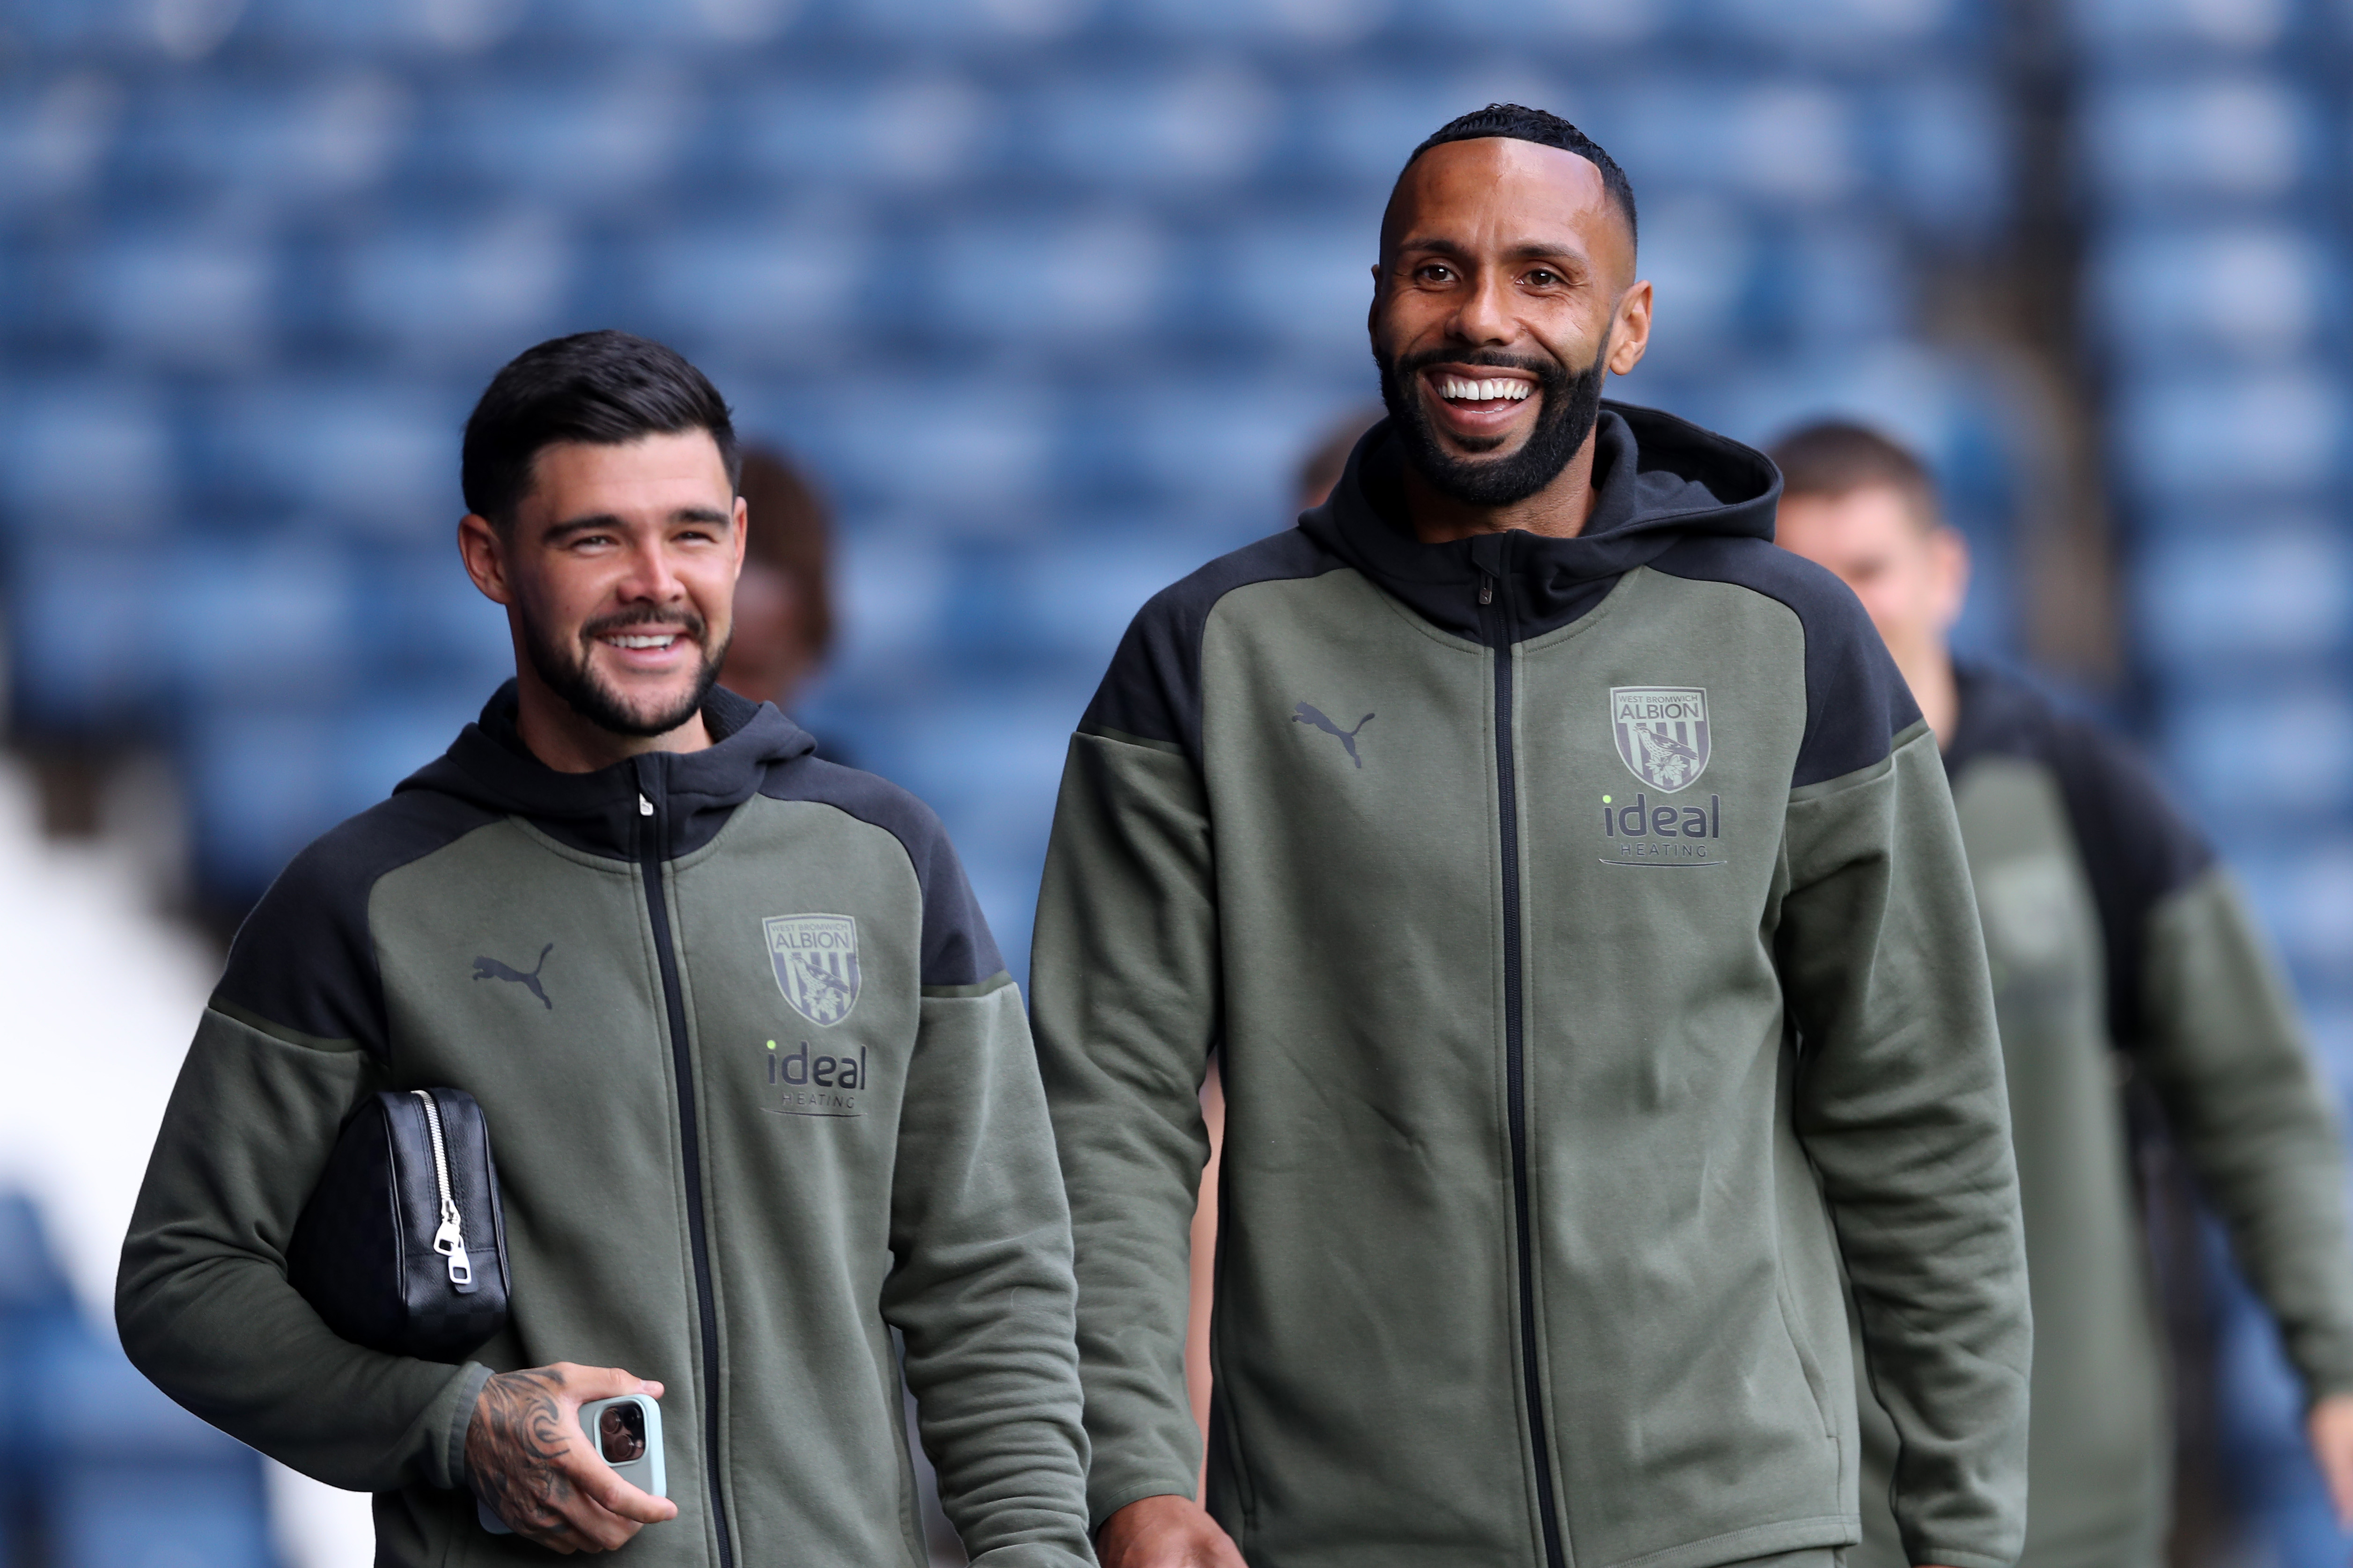 Alex Mowatt and Kyle Bartley arriving for a game at The Hawthorns wearing Albion tracksuits 